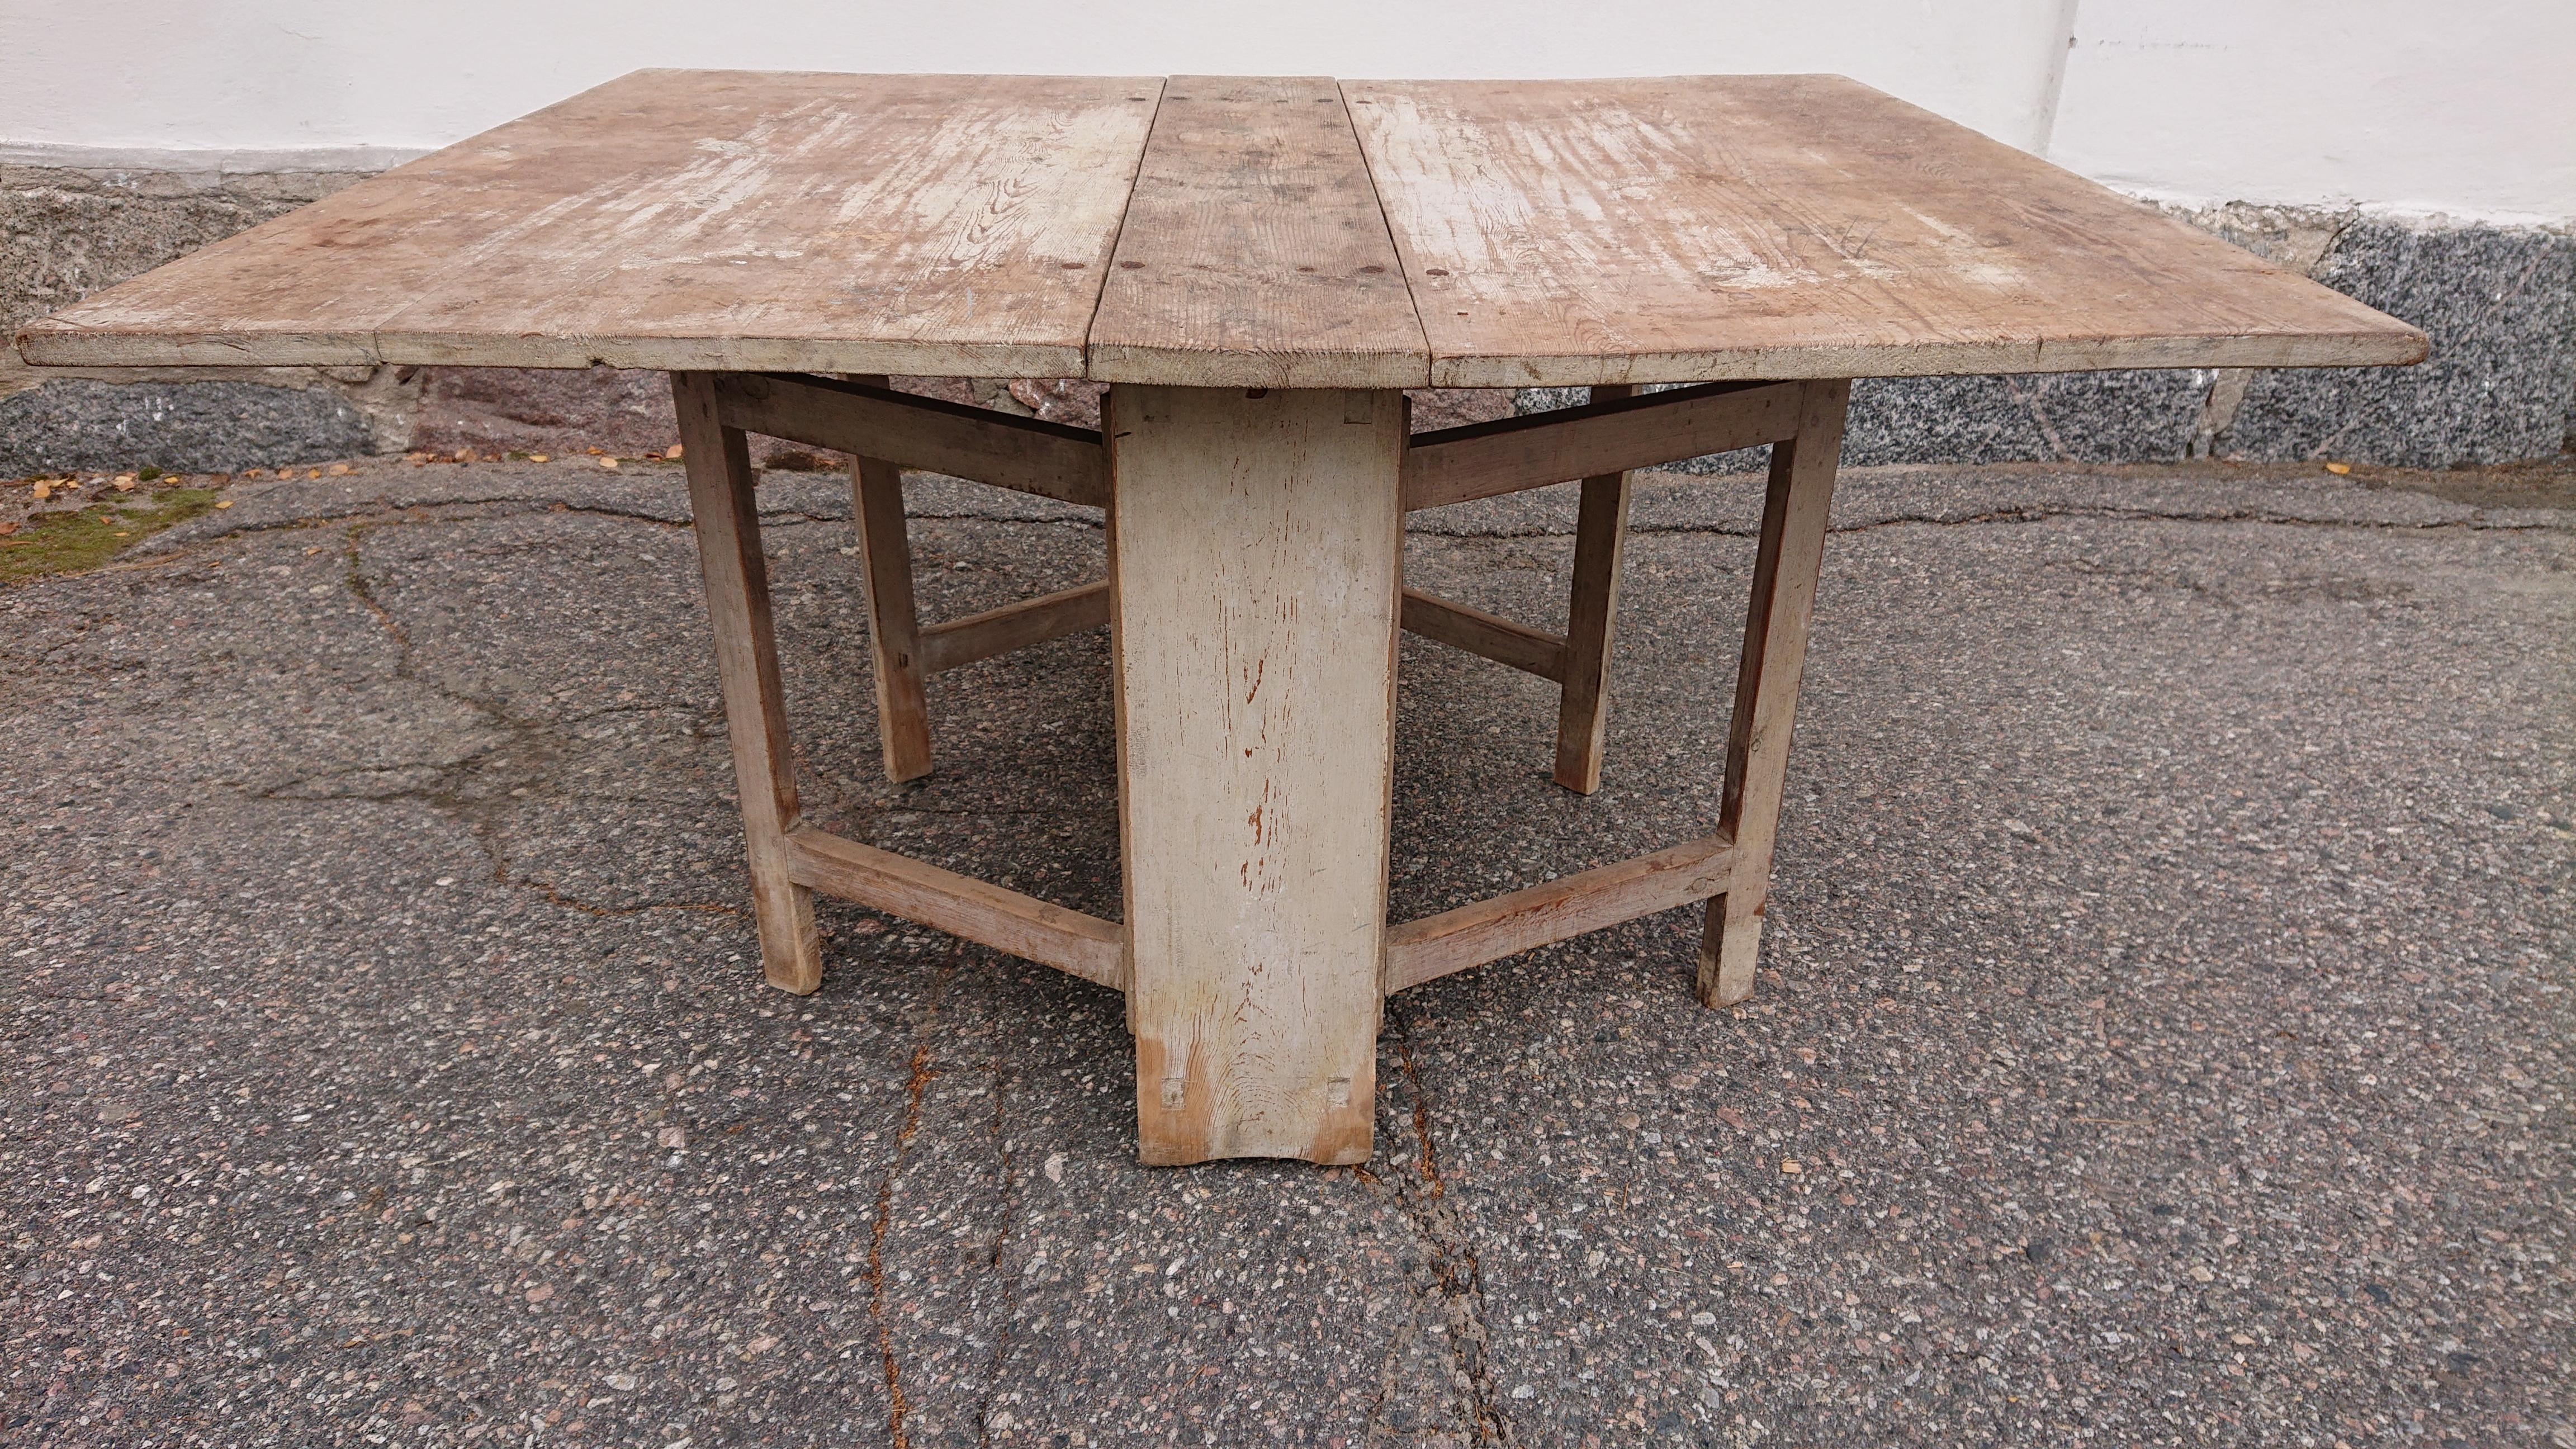 19th Century drop leaf table from Skelleftea ,Northern Sweden.

Measurements H. 75cm W. 145cm D. 123cm
The measurements shown in the listing is when the drop- leaves are folded down for an accurate shipping quote.

The table has leaf on each